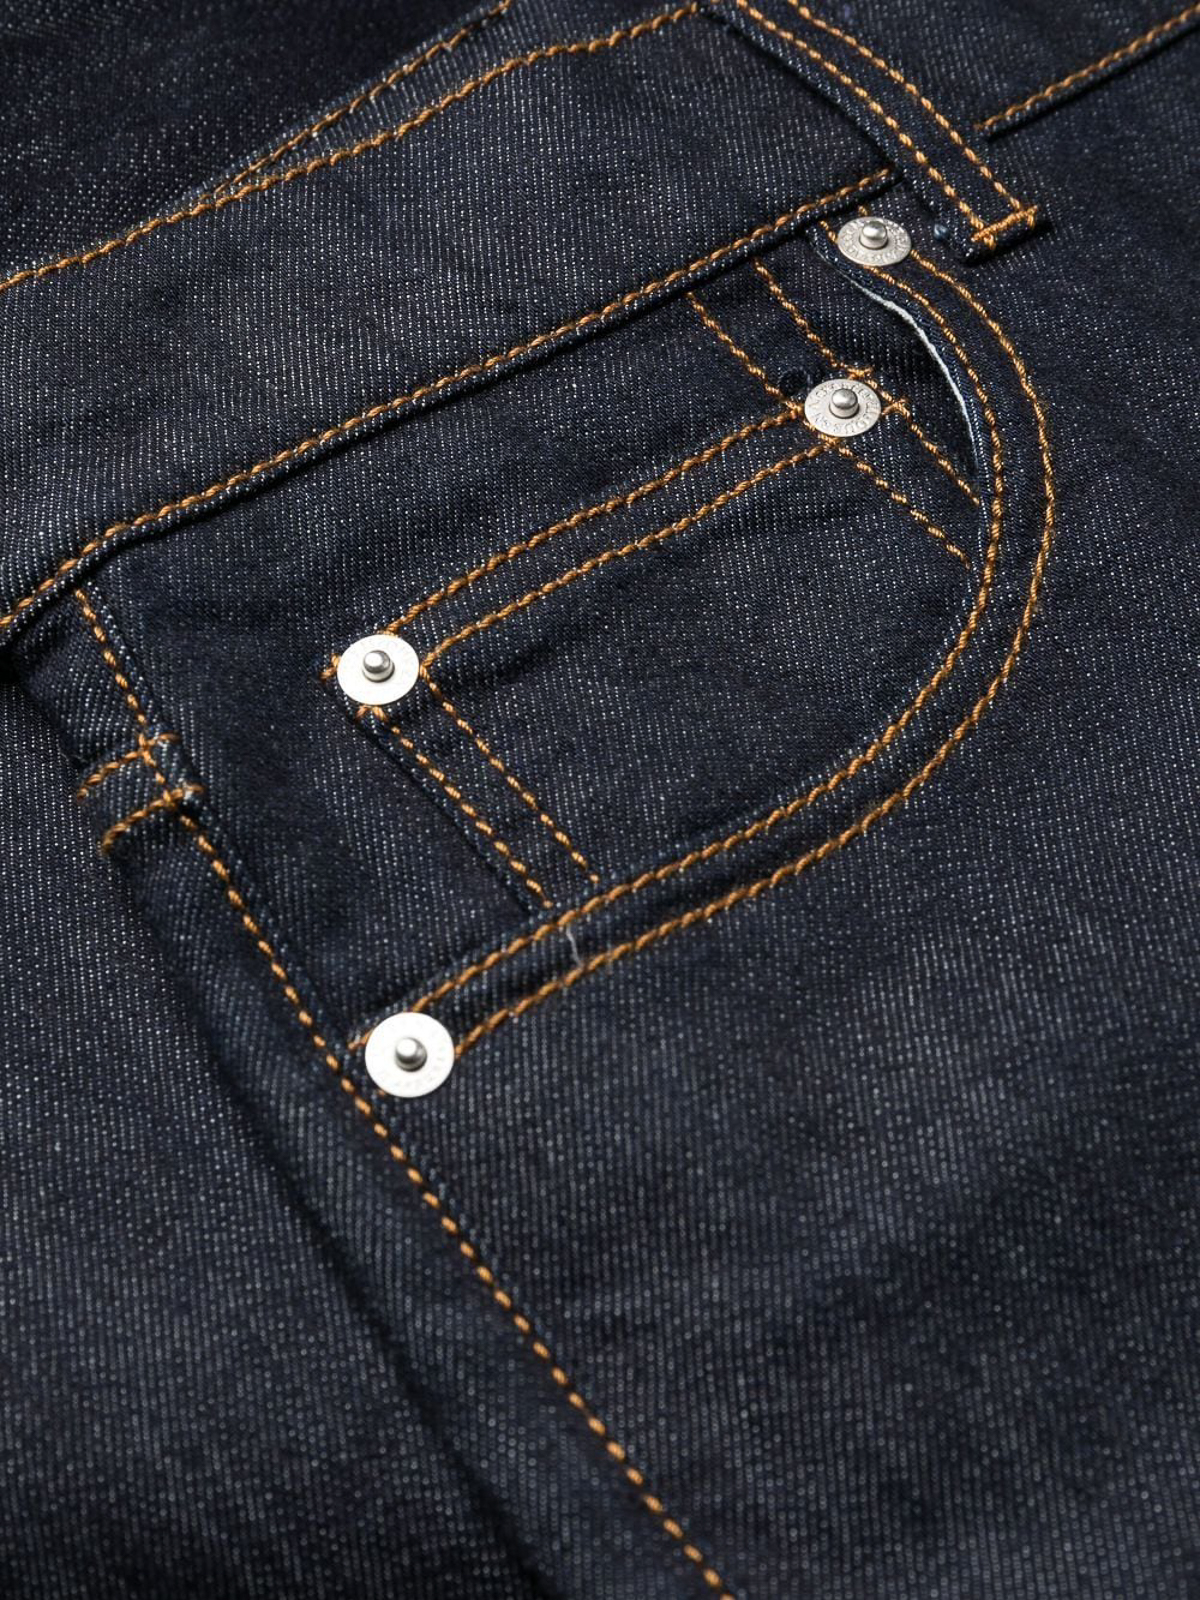 Straight-Leg Logo-Embroidered Jeans